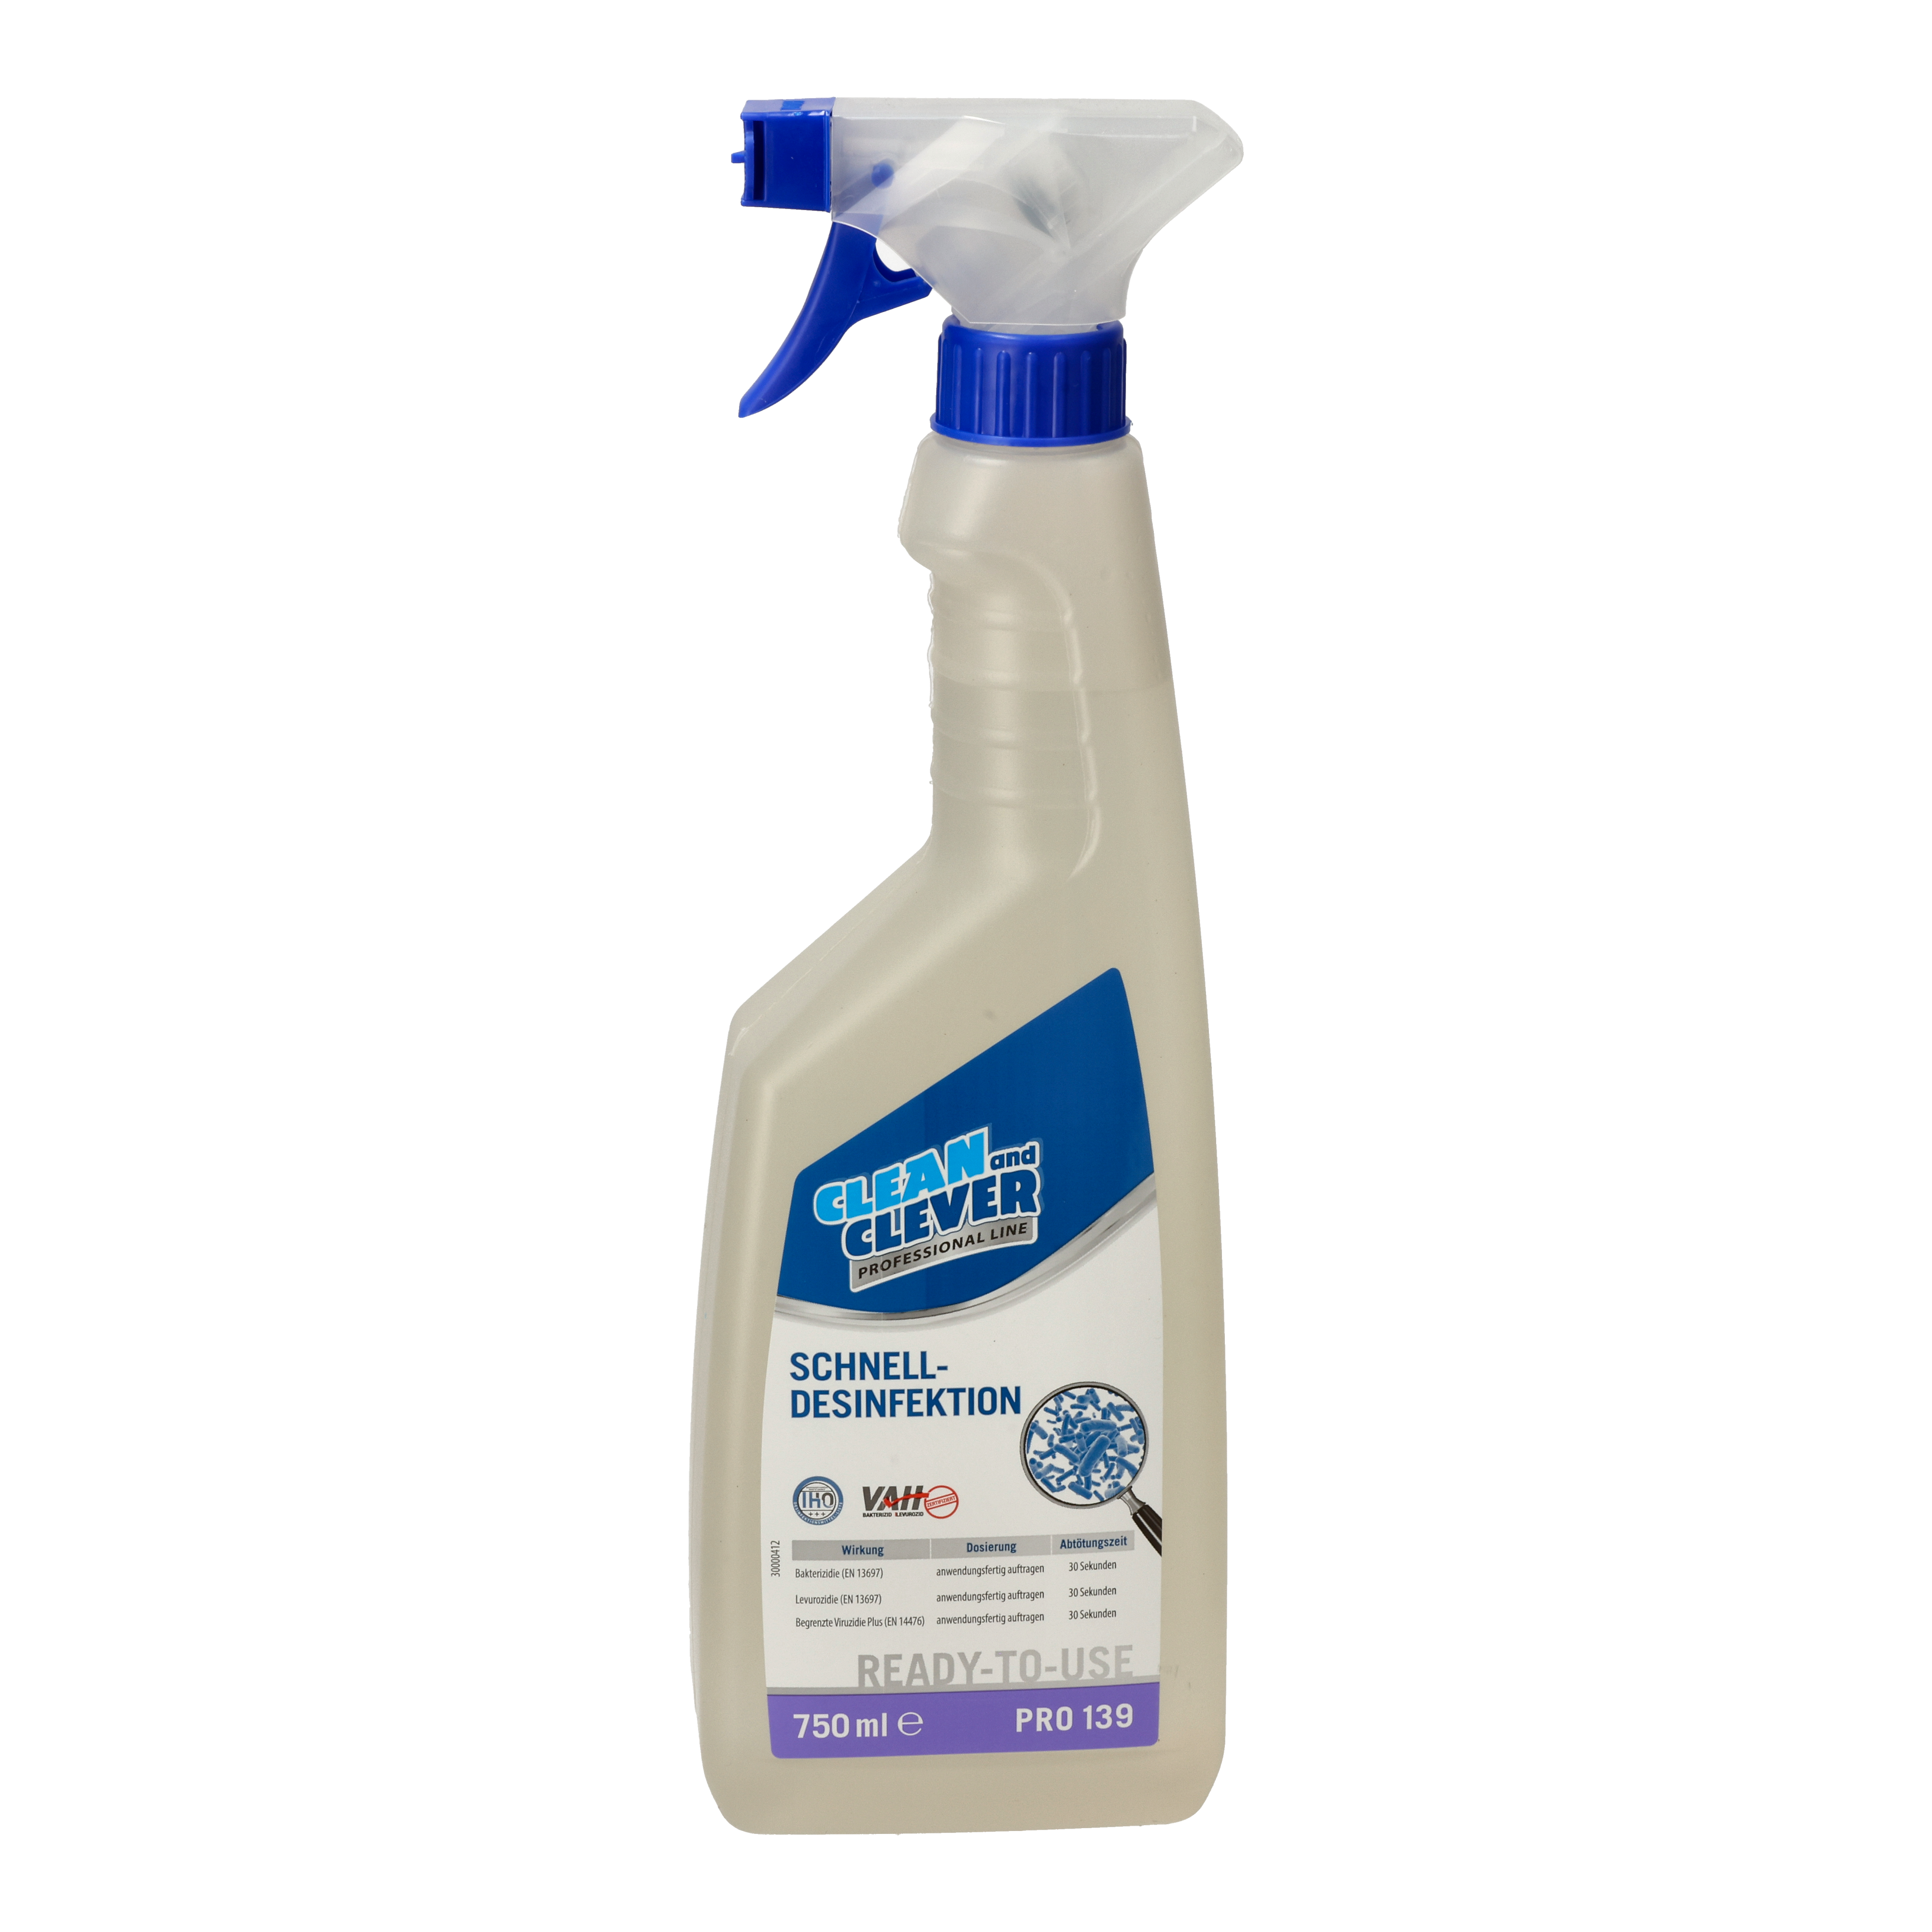 CLEAN and CLEVER PROFESSIONAL Schnelldesinfektion PRO139 - 750 ml